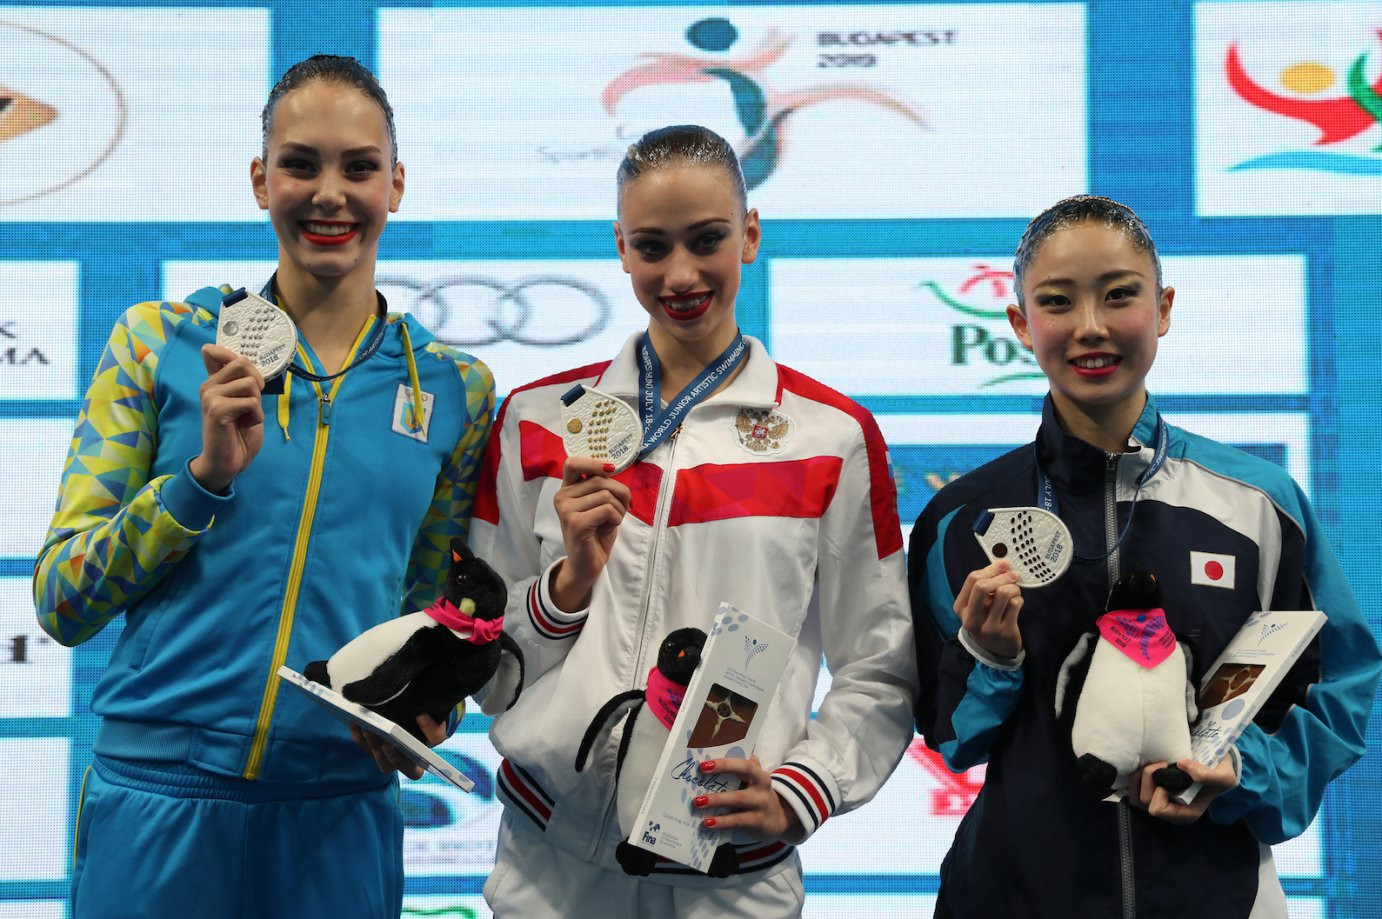 Russia's Varvara Subbotina, centre, won both golds on offer at the championships yesterday ©FINA